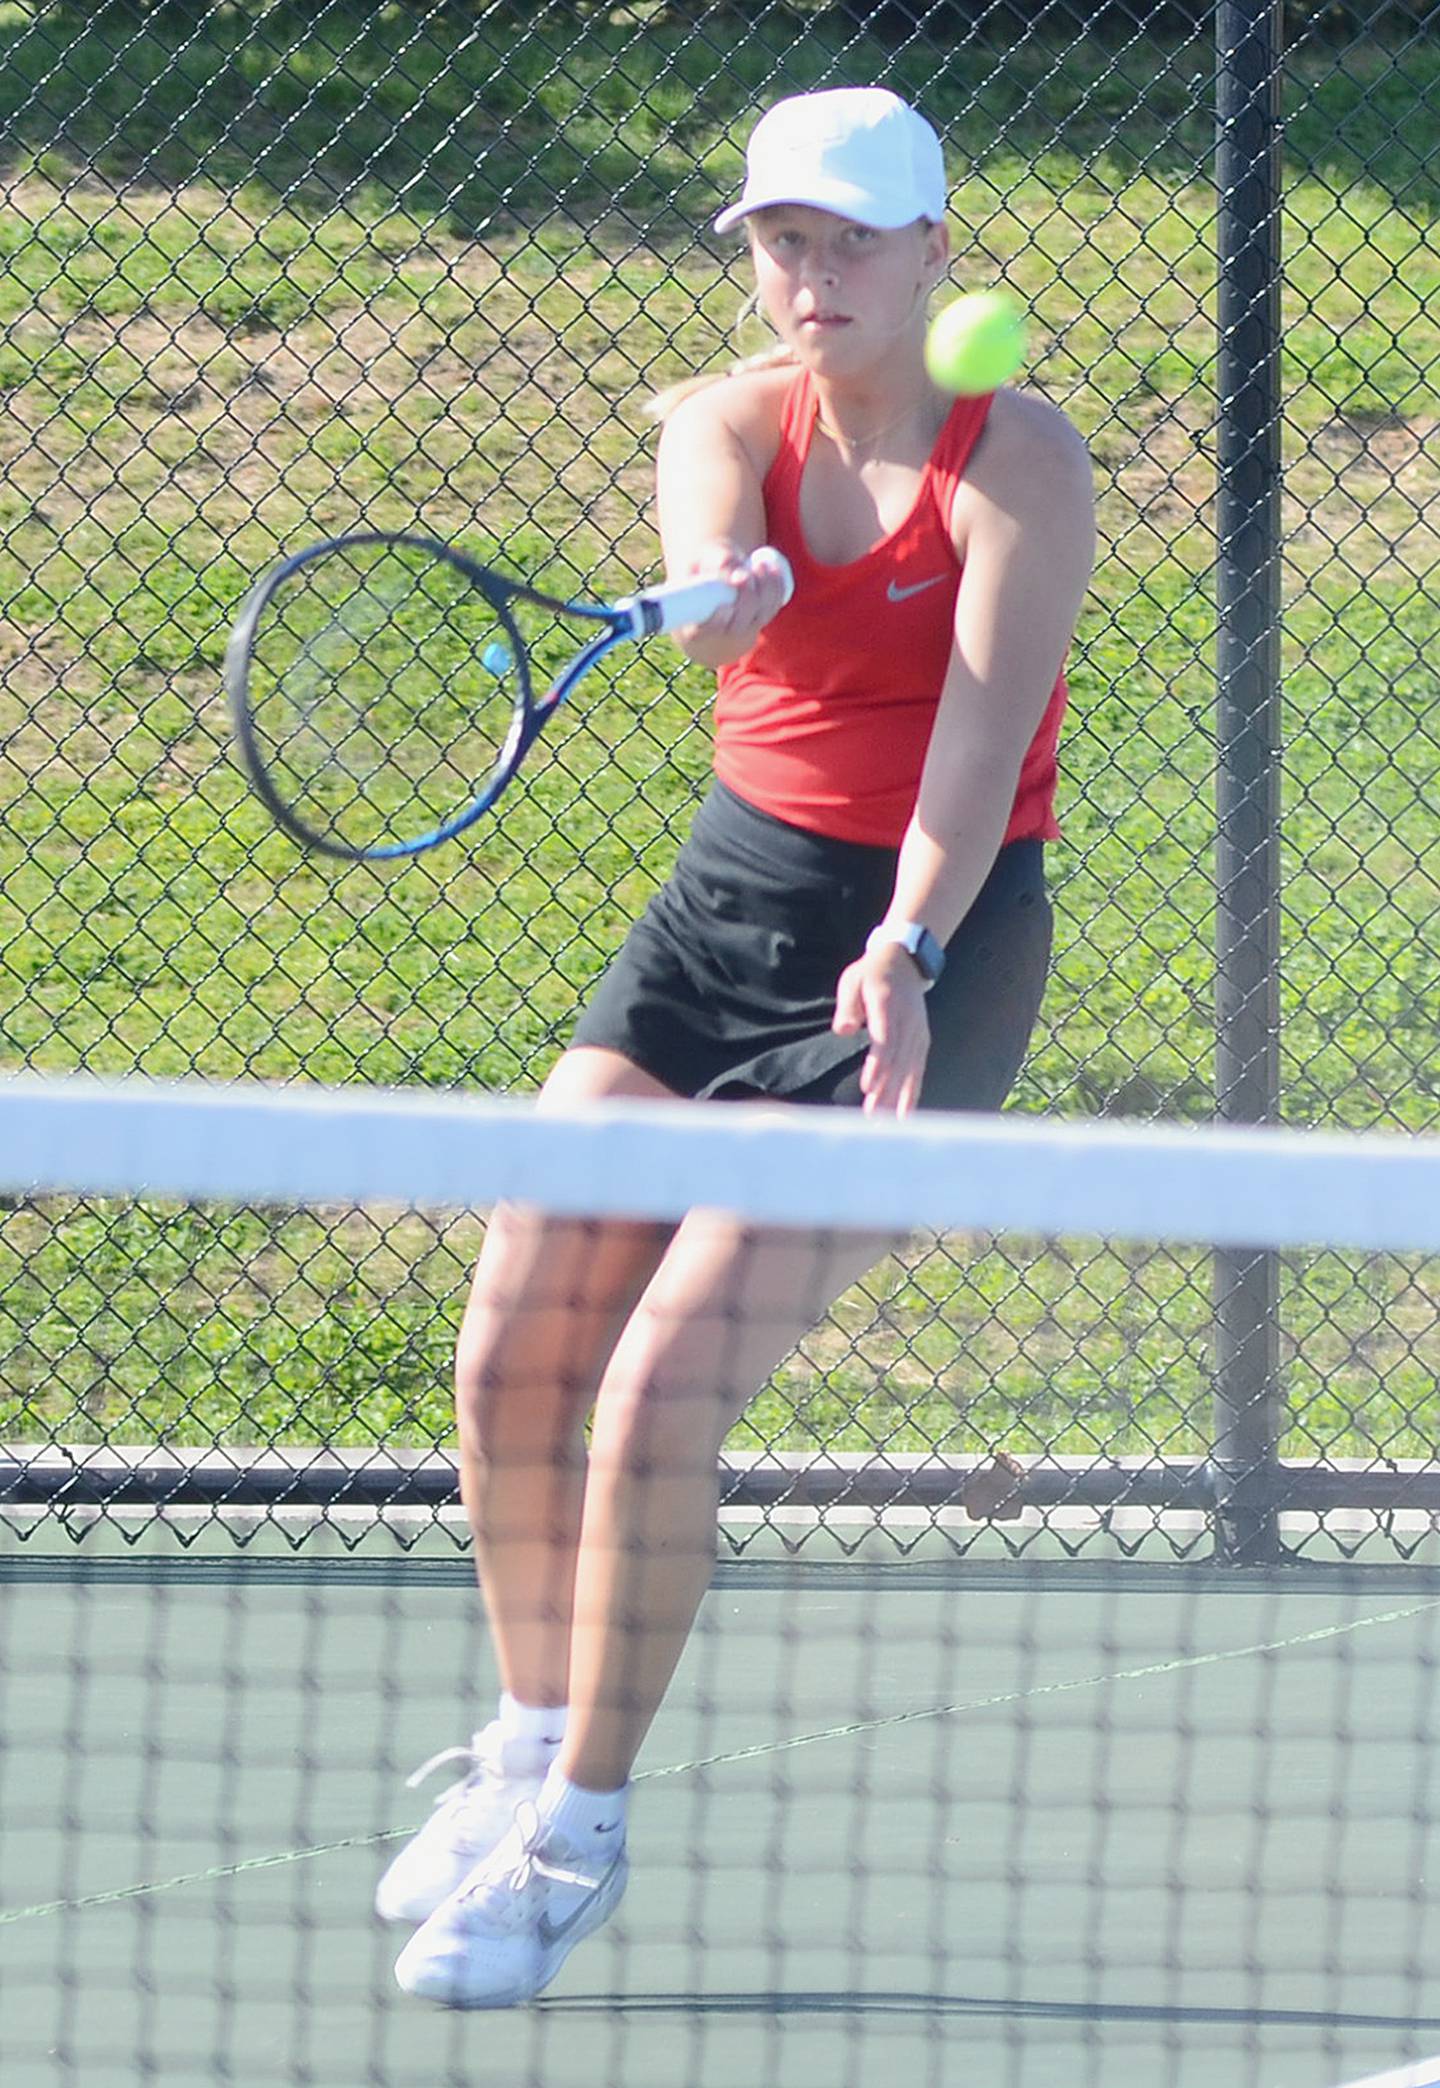 Creston senior Josie Mahan concentrates on a forehand shot during her singles match against Atlantic Friday. Mahan won 6-1, 6-4 at No. 1 singles.